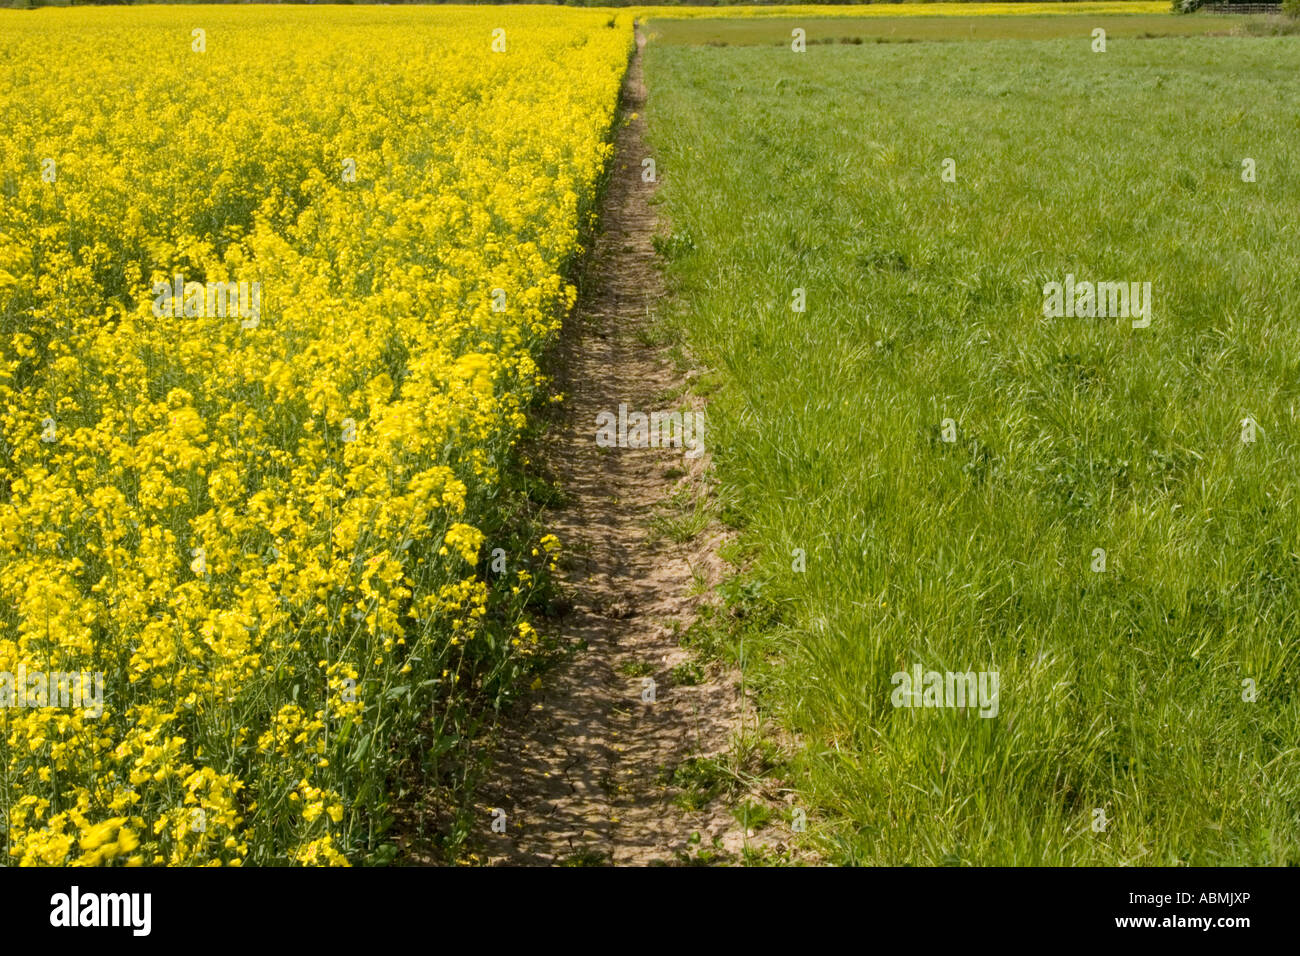 Field of brassica napus (rapeseed) next to a field left fallow and overgrown with grass Stock Photo